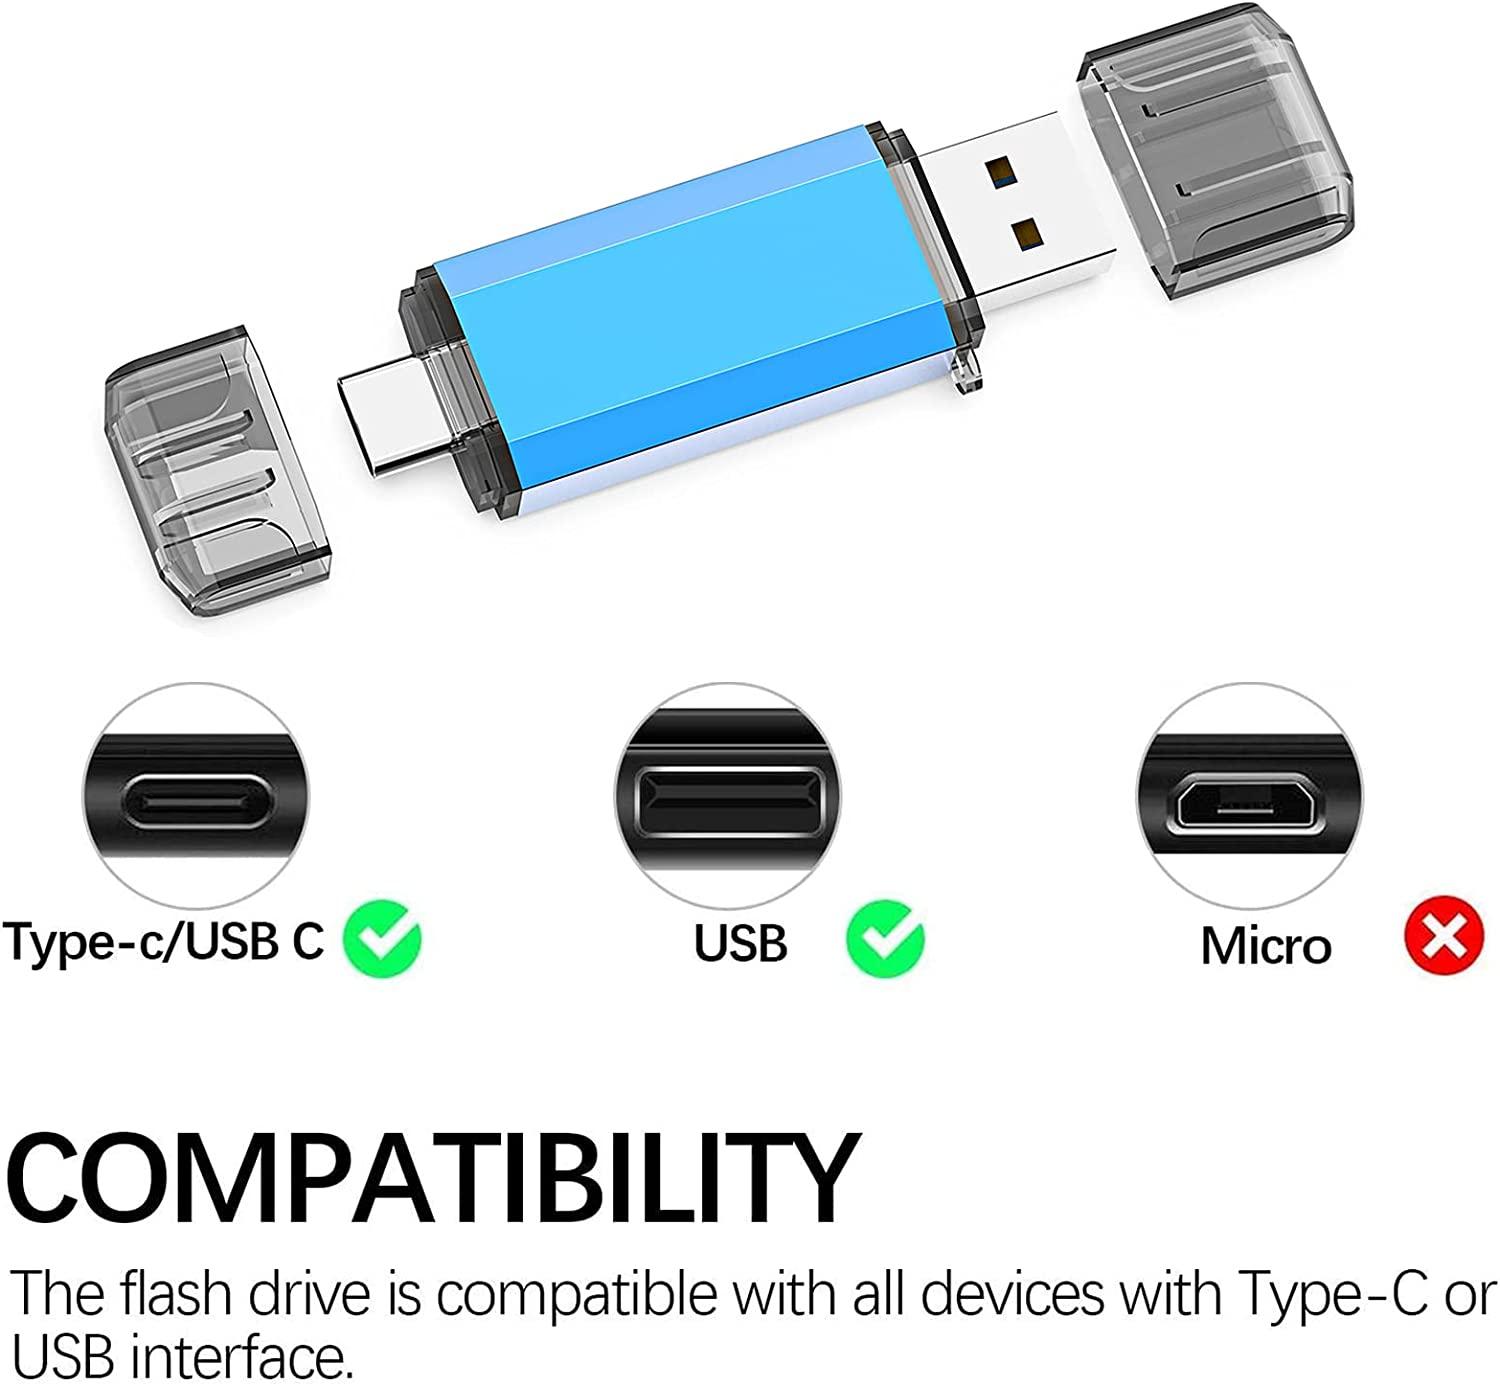 onn. USB 3.0 Flash Drive for Tablets and Computers, 64 GB Capacity